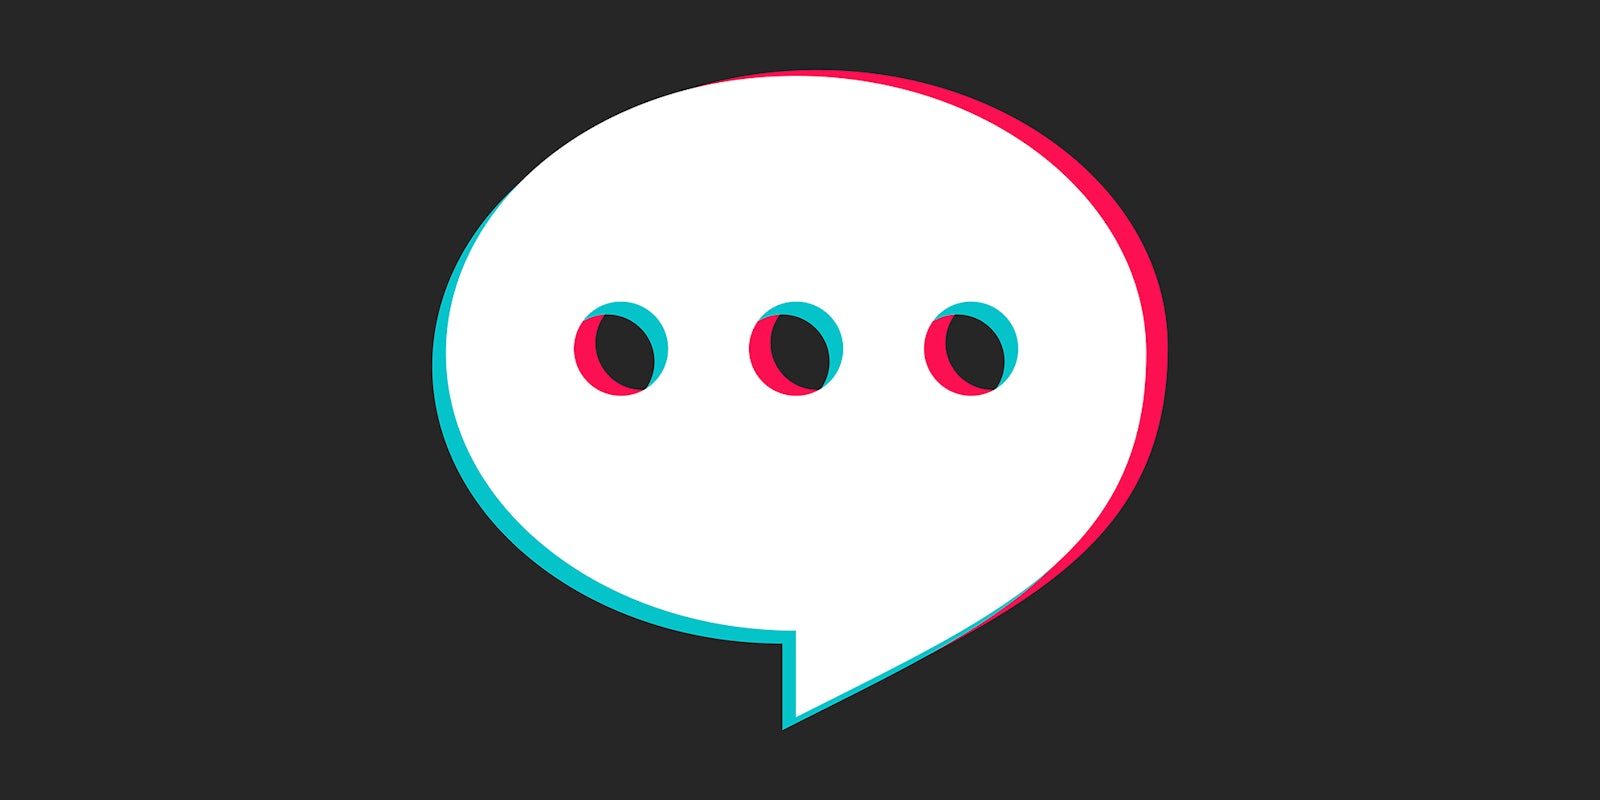 speech bubble with ellipses, made in the tiktok logo style